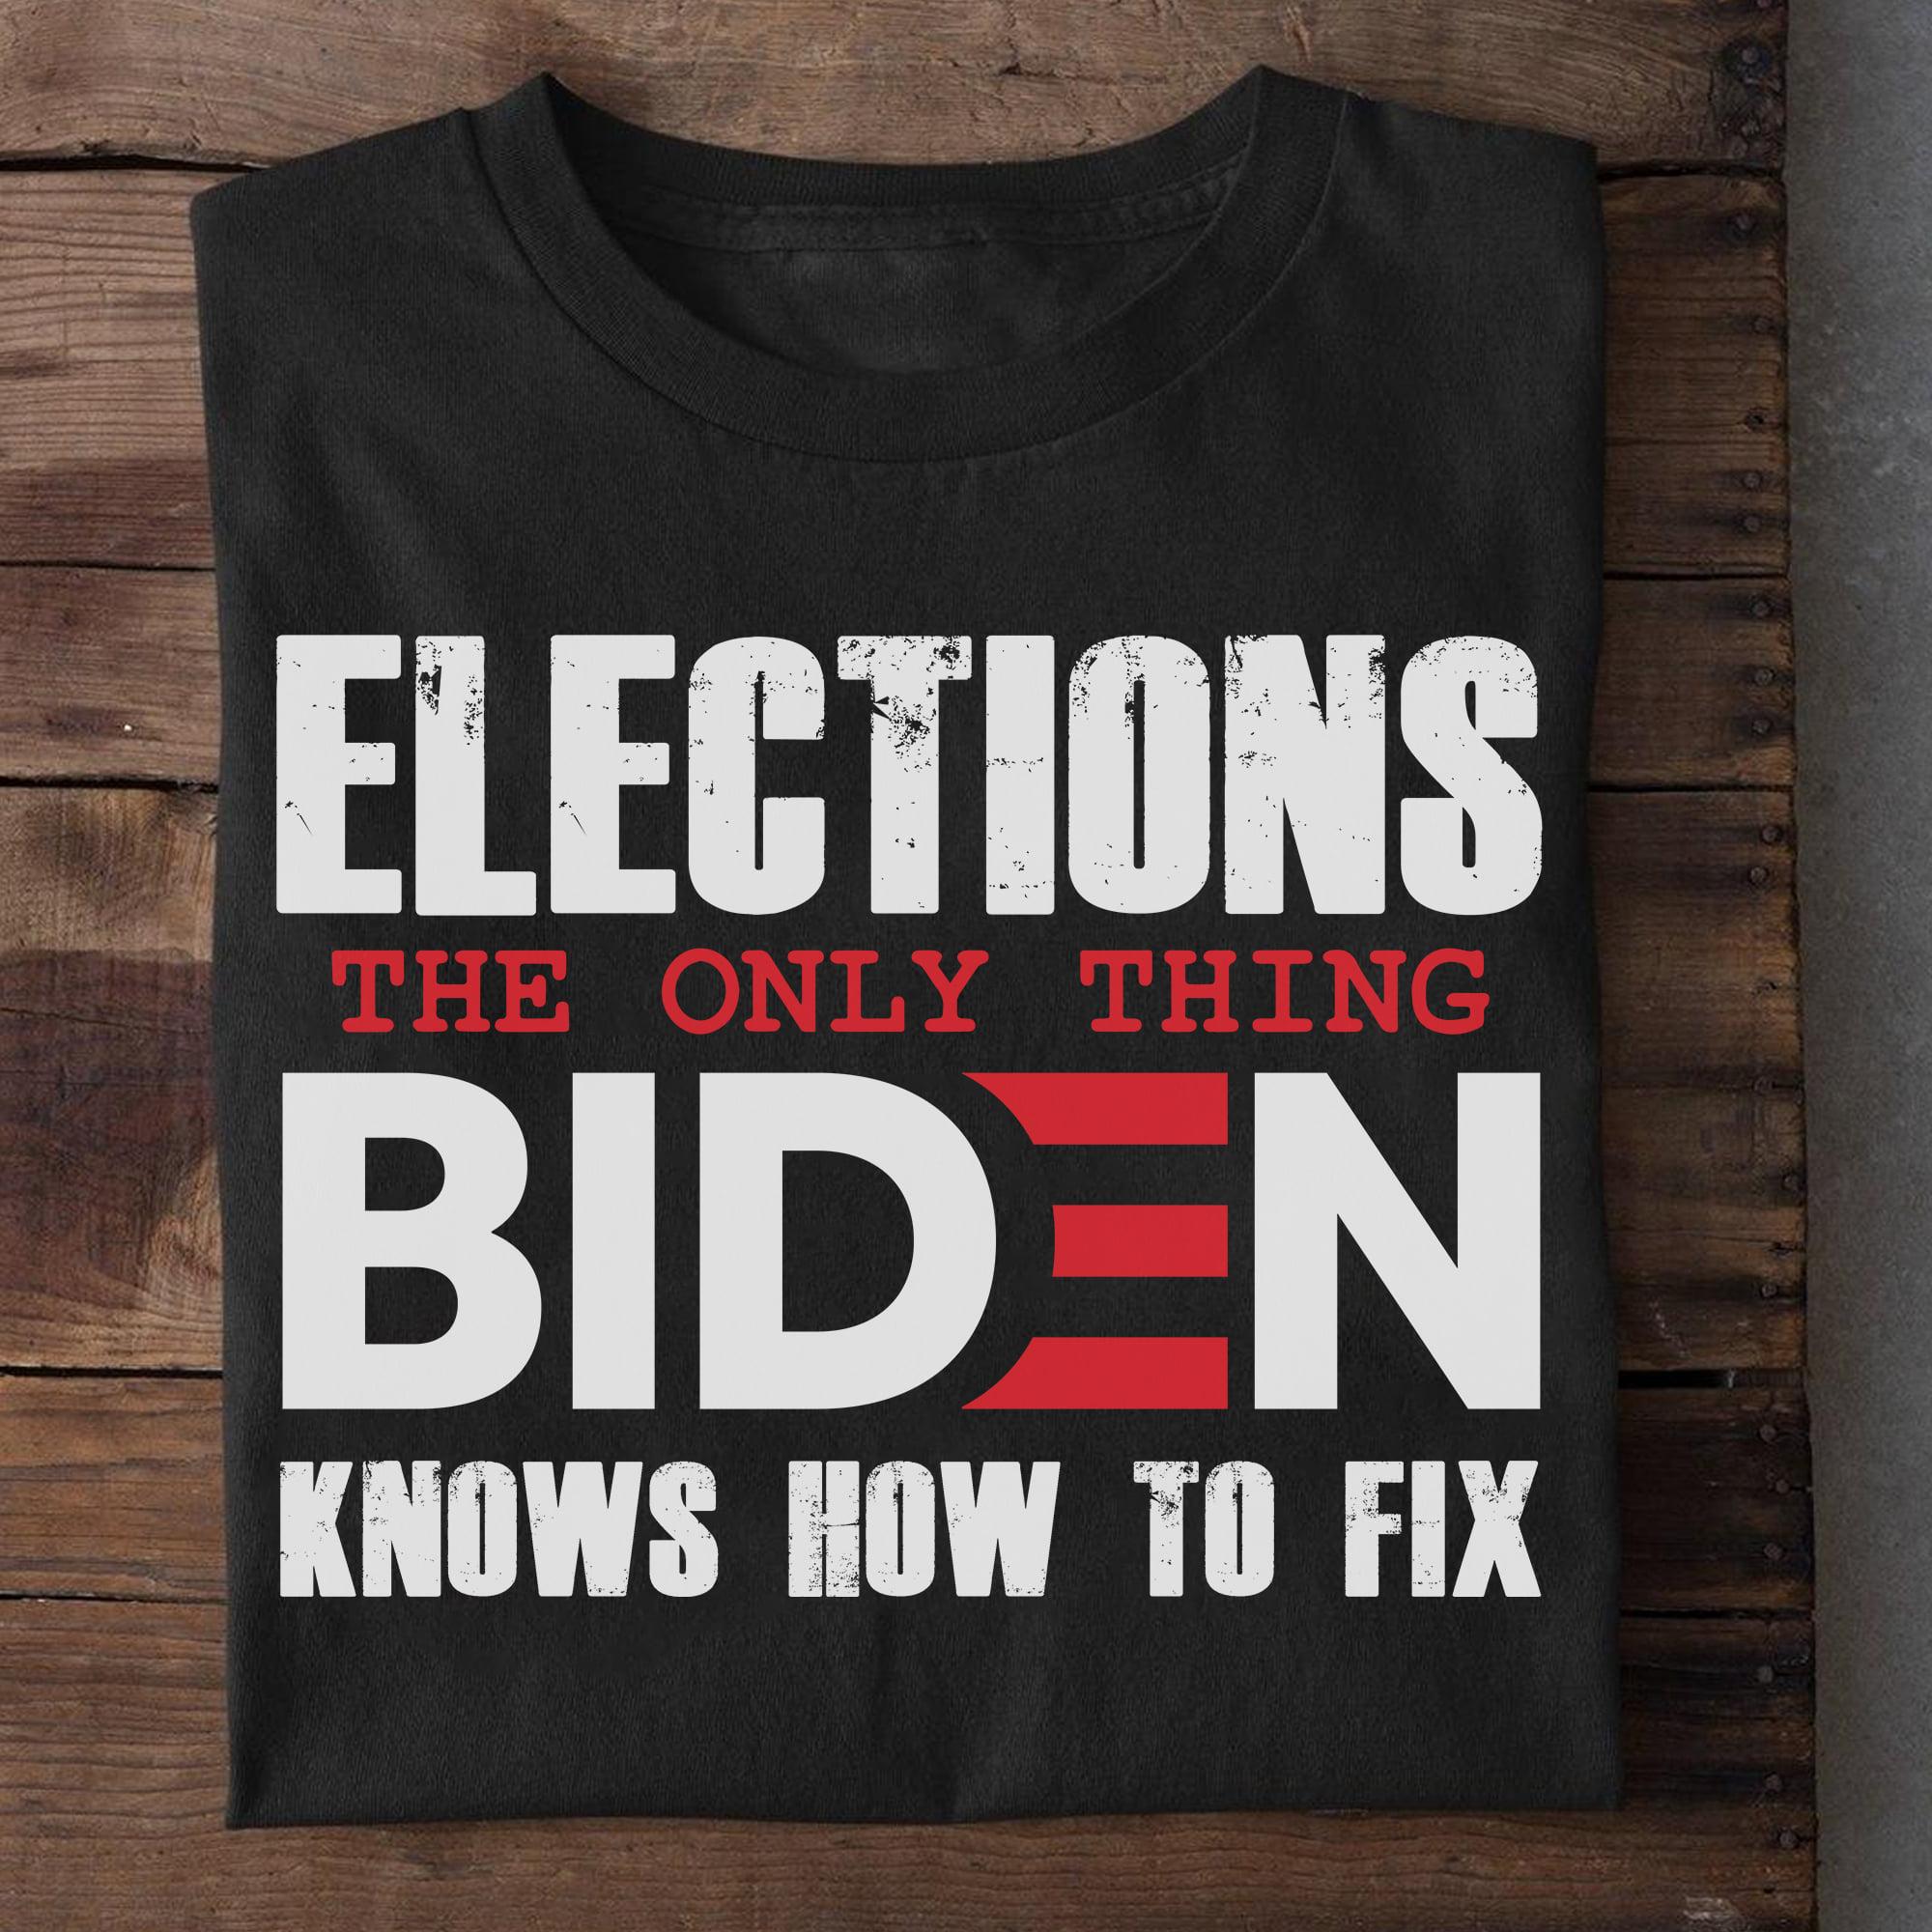 Elections the only thing biden knows how to fix